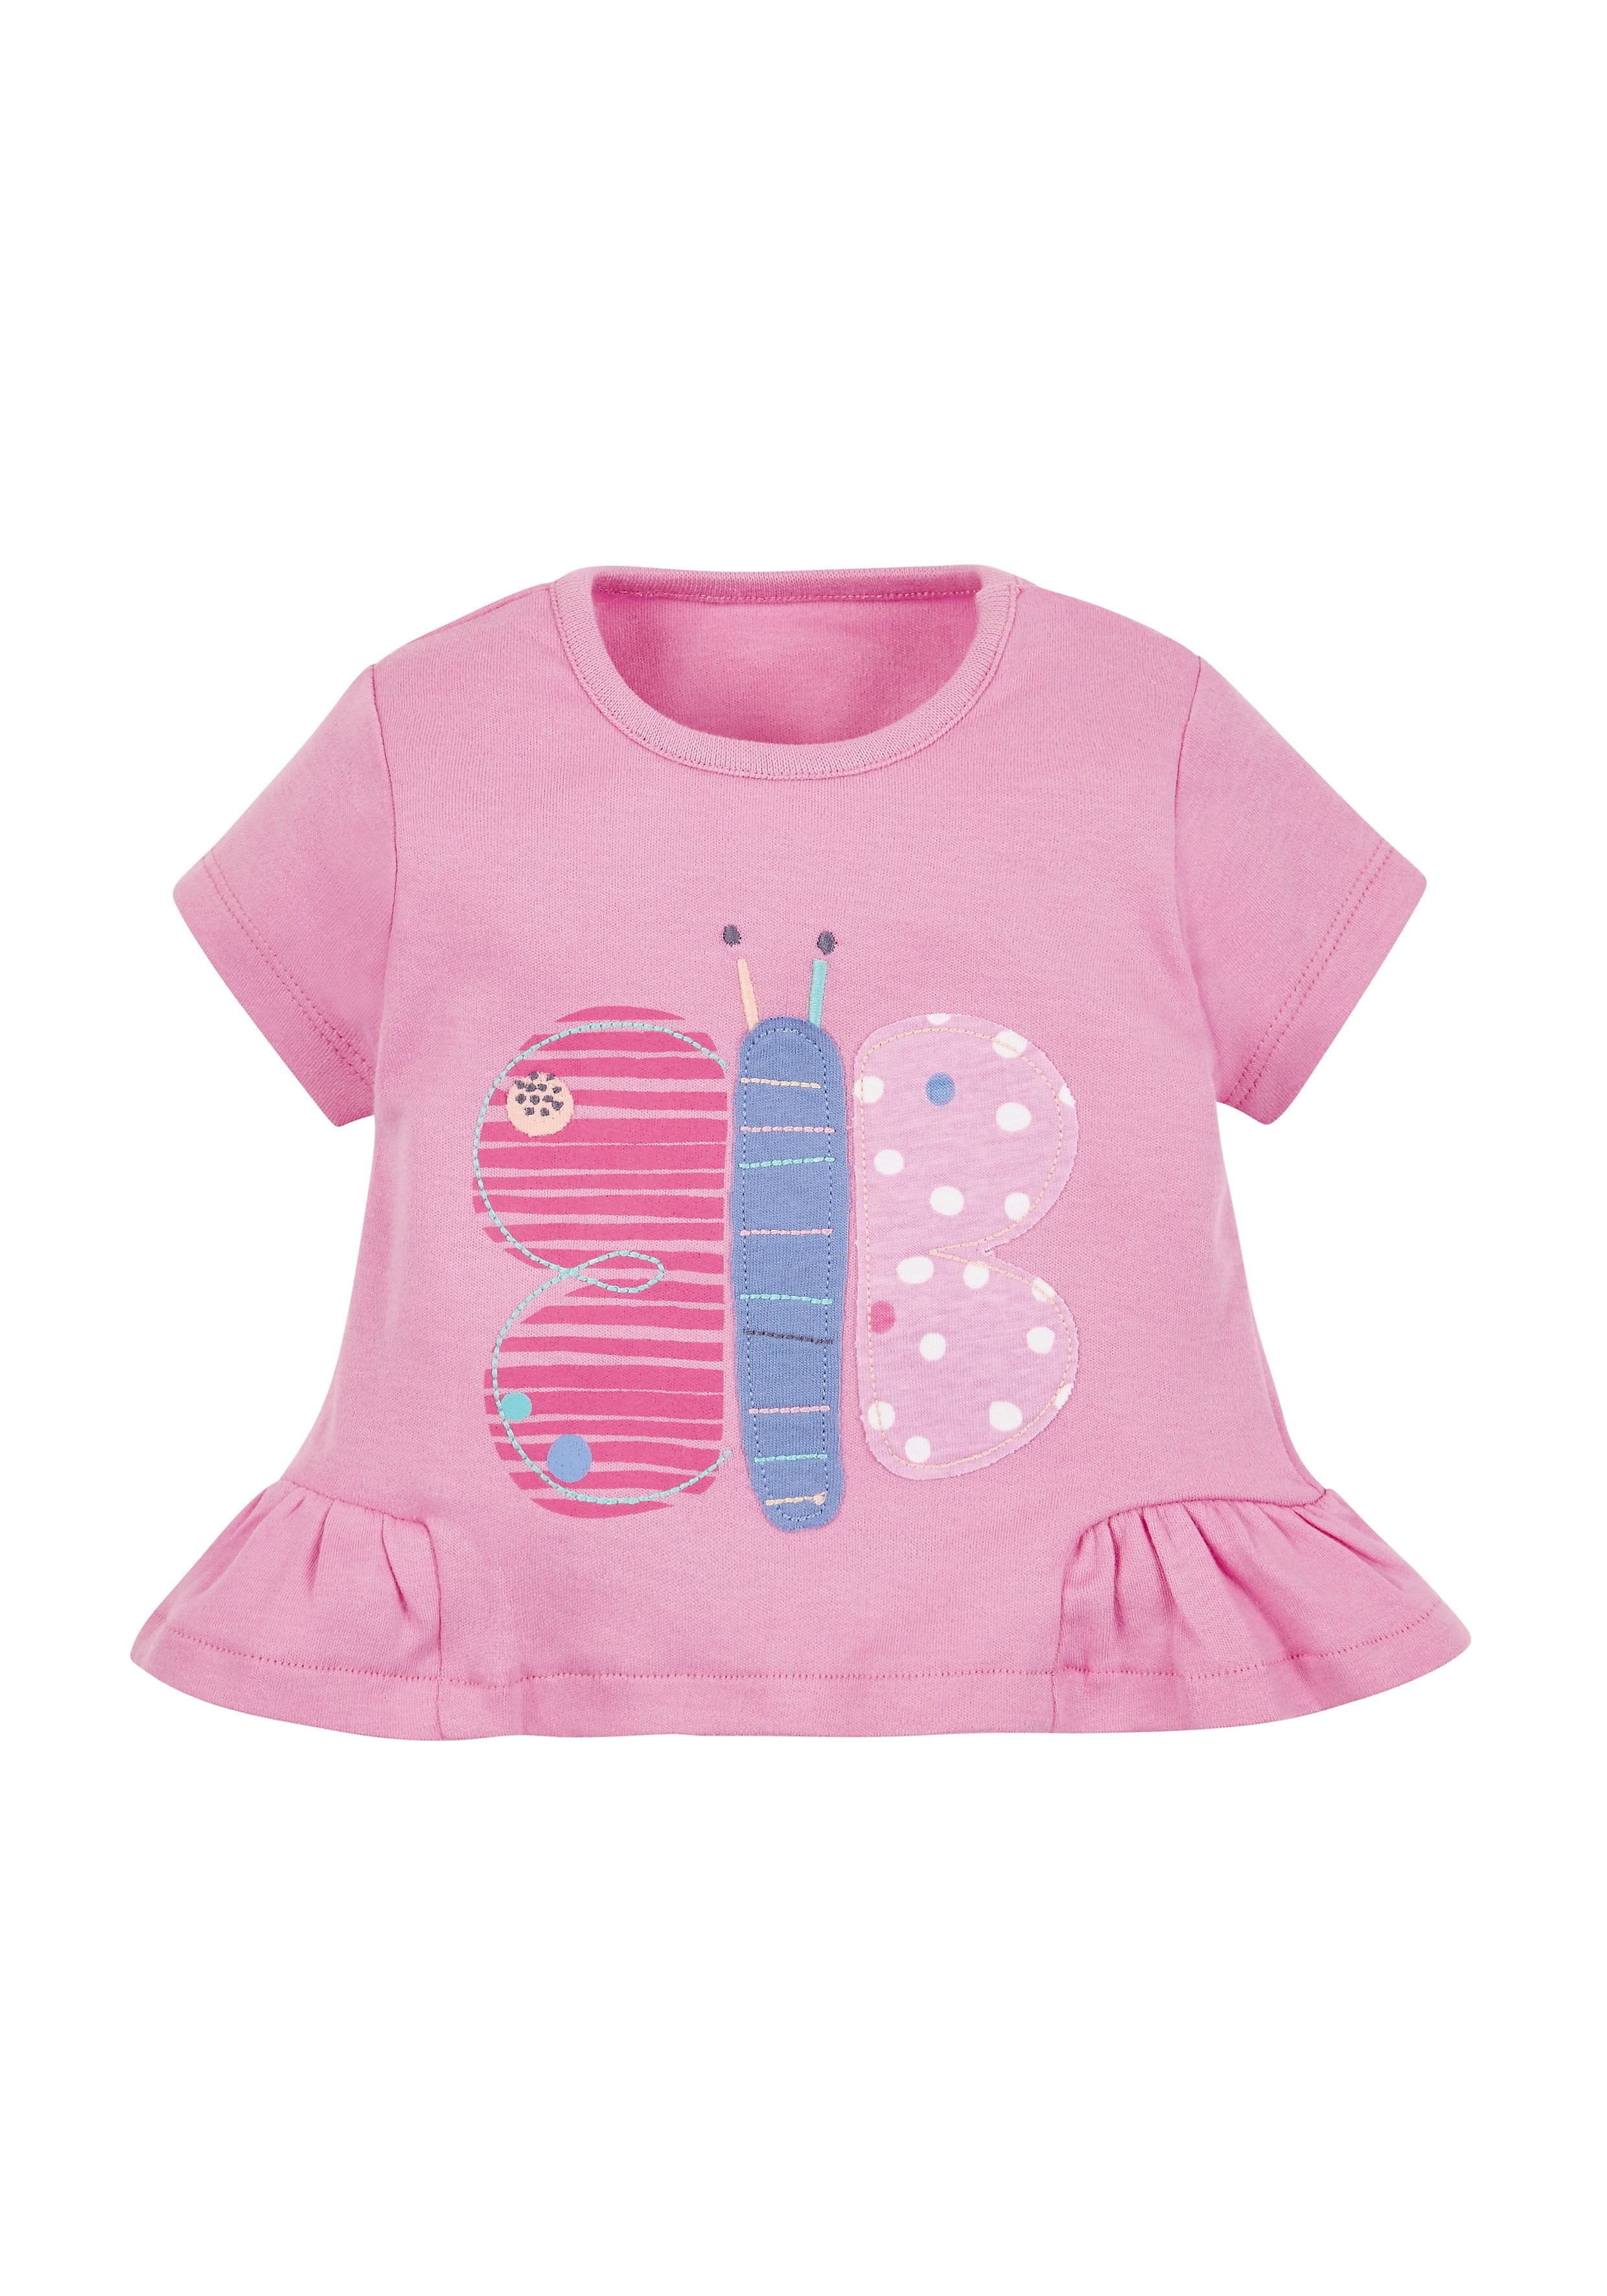 Mothercare | Girls Butterfly Top - Pink 0